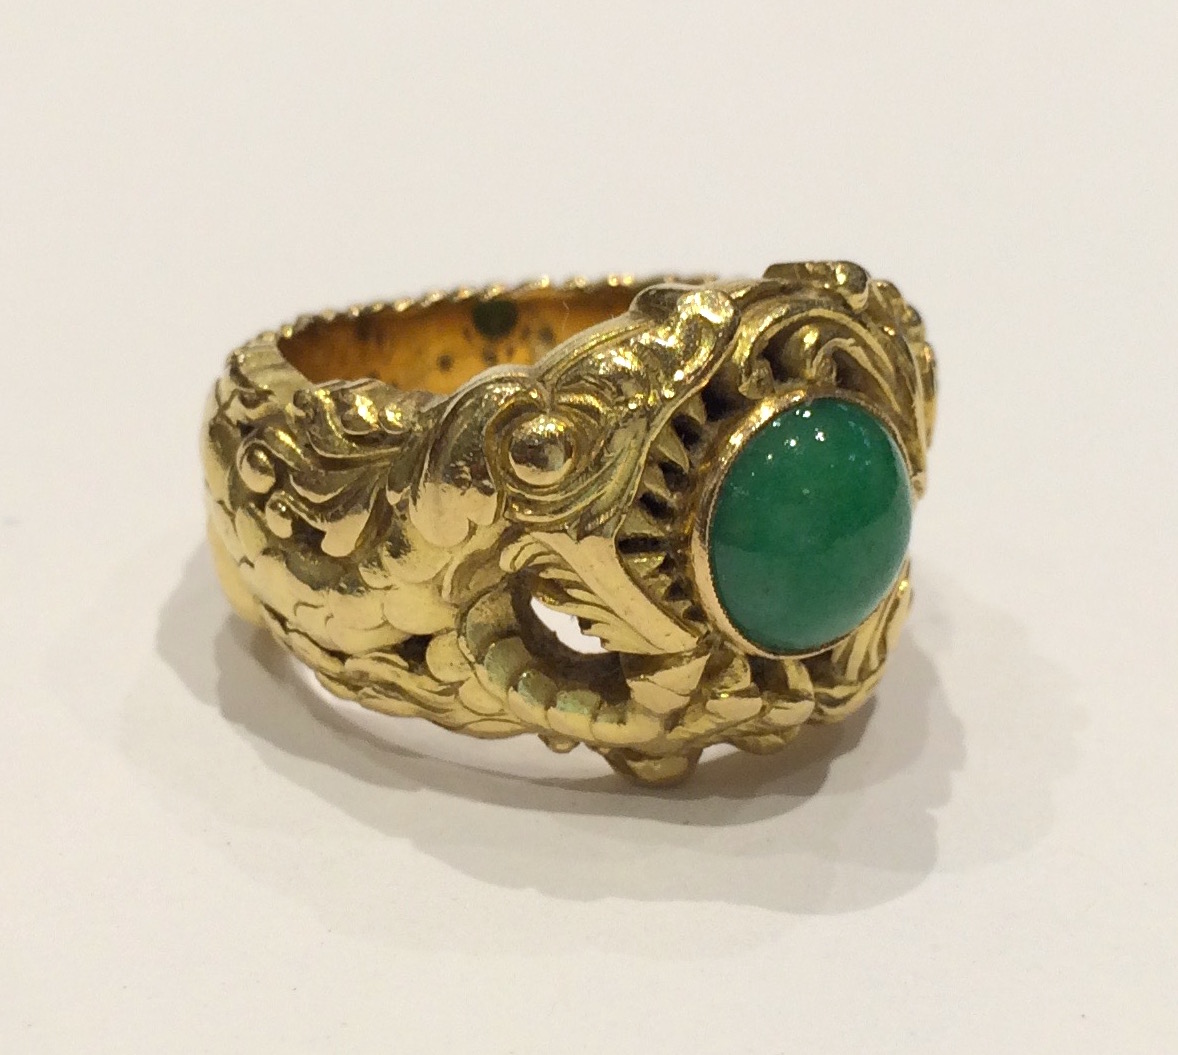 Rene Lalique (attr.) intricately carved and sculpted “Imperial Dragon” ring in 18k gold and set with a round jadeite jewel cabochon, signed, c. 1890